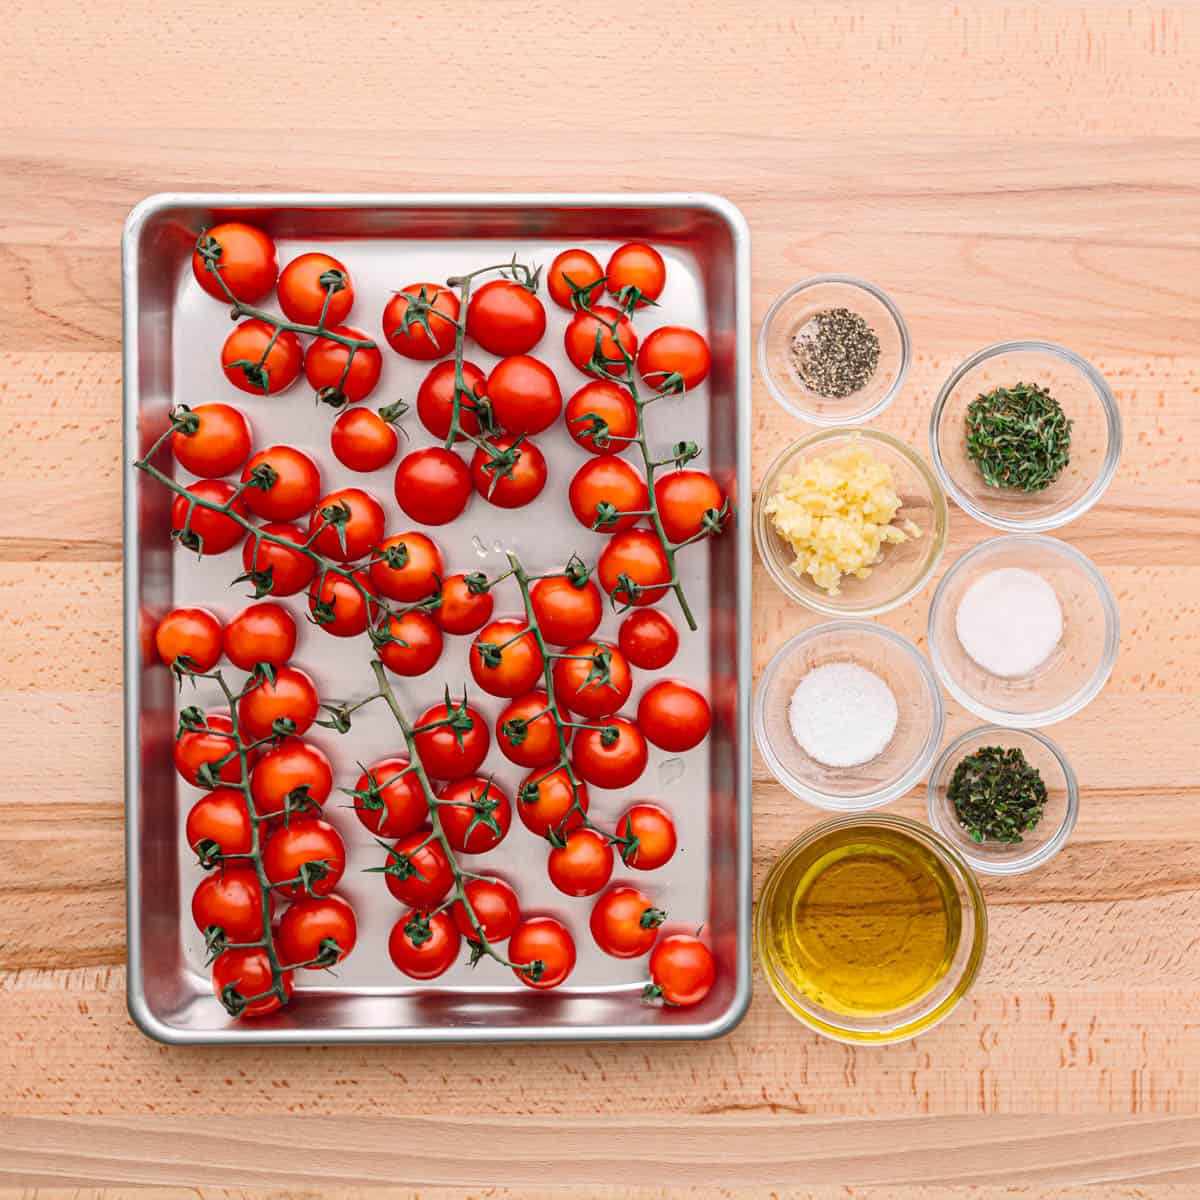 ingredients for roasted tomatoes.